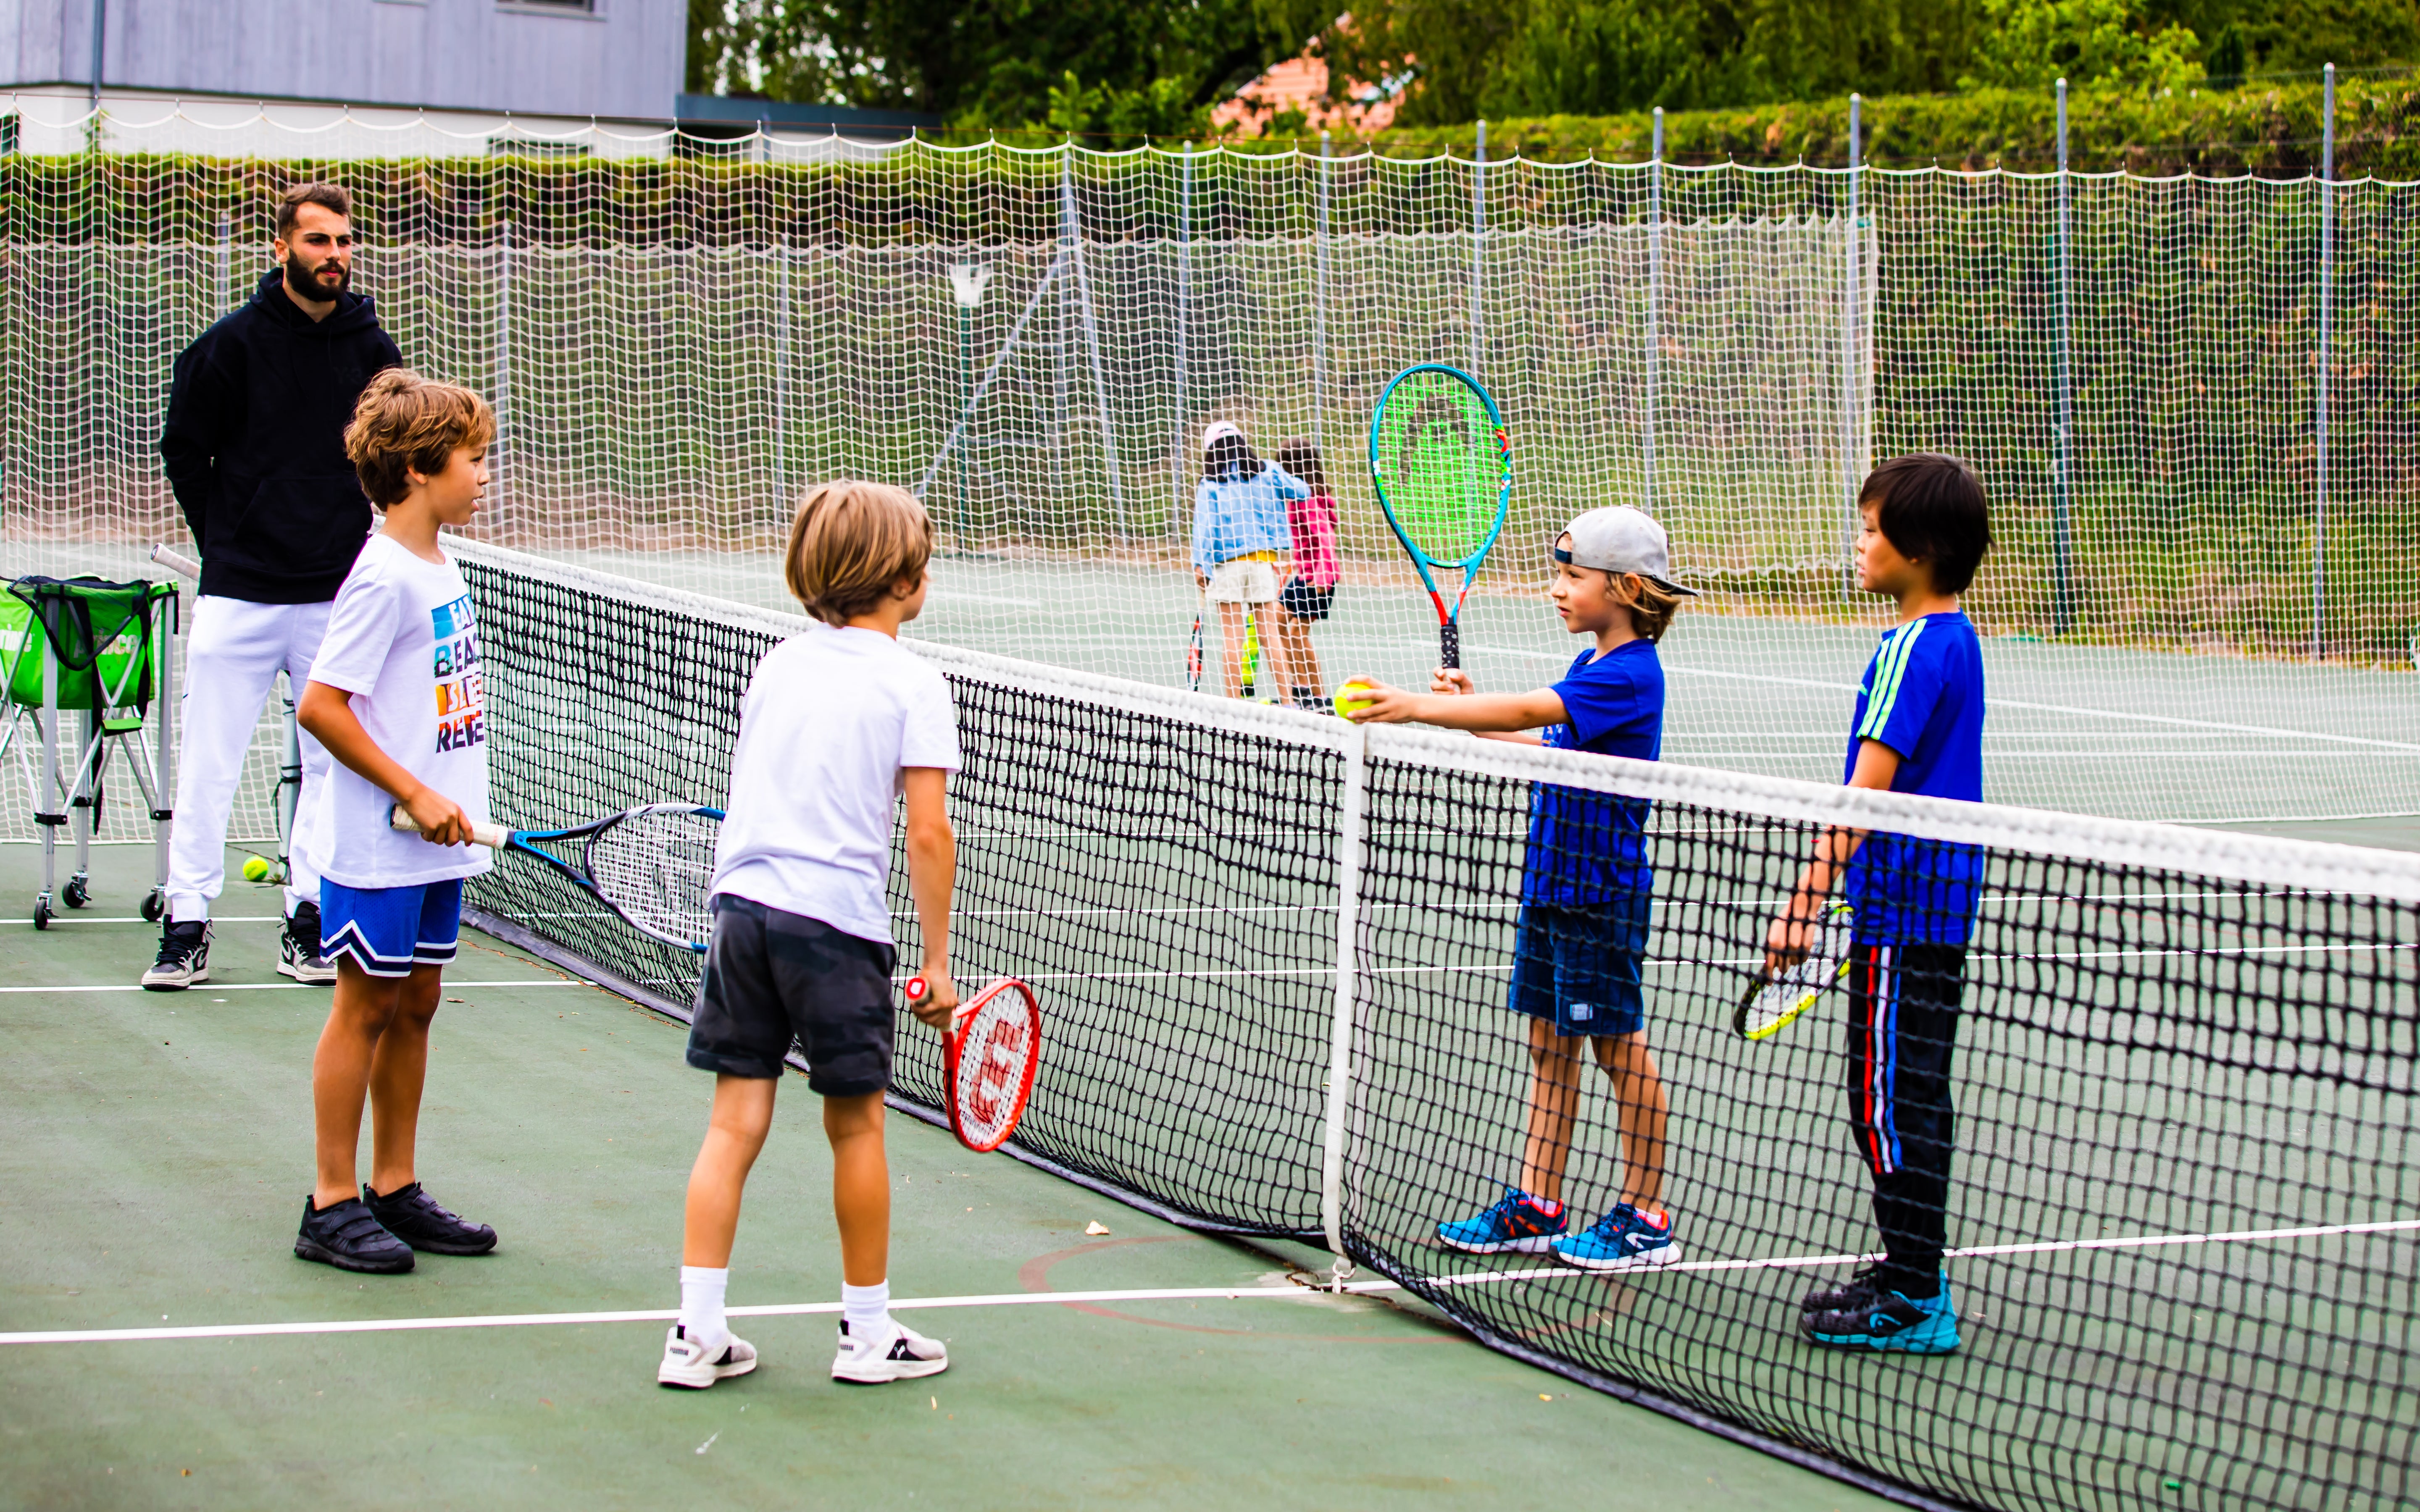 Junior Camp - Tennis and Multi-Activity, 6 to 12 years old